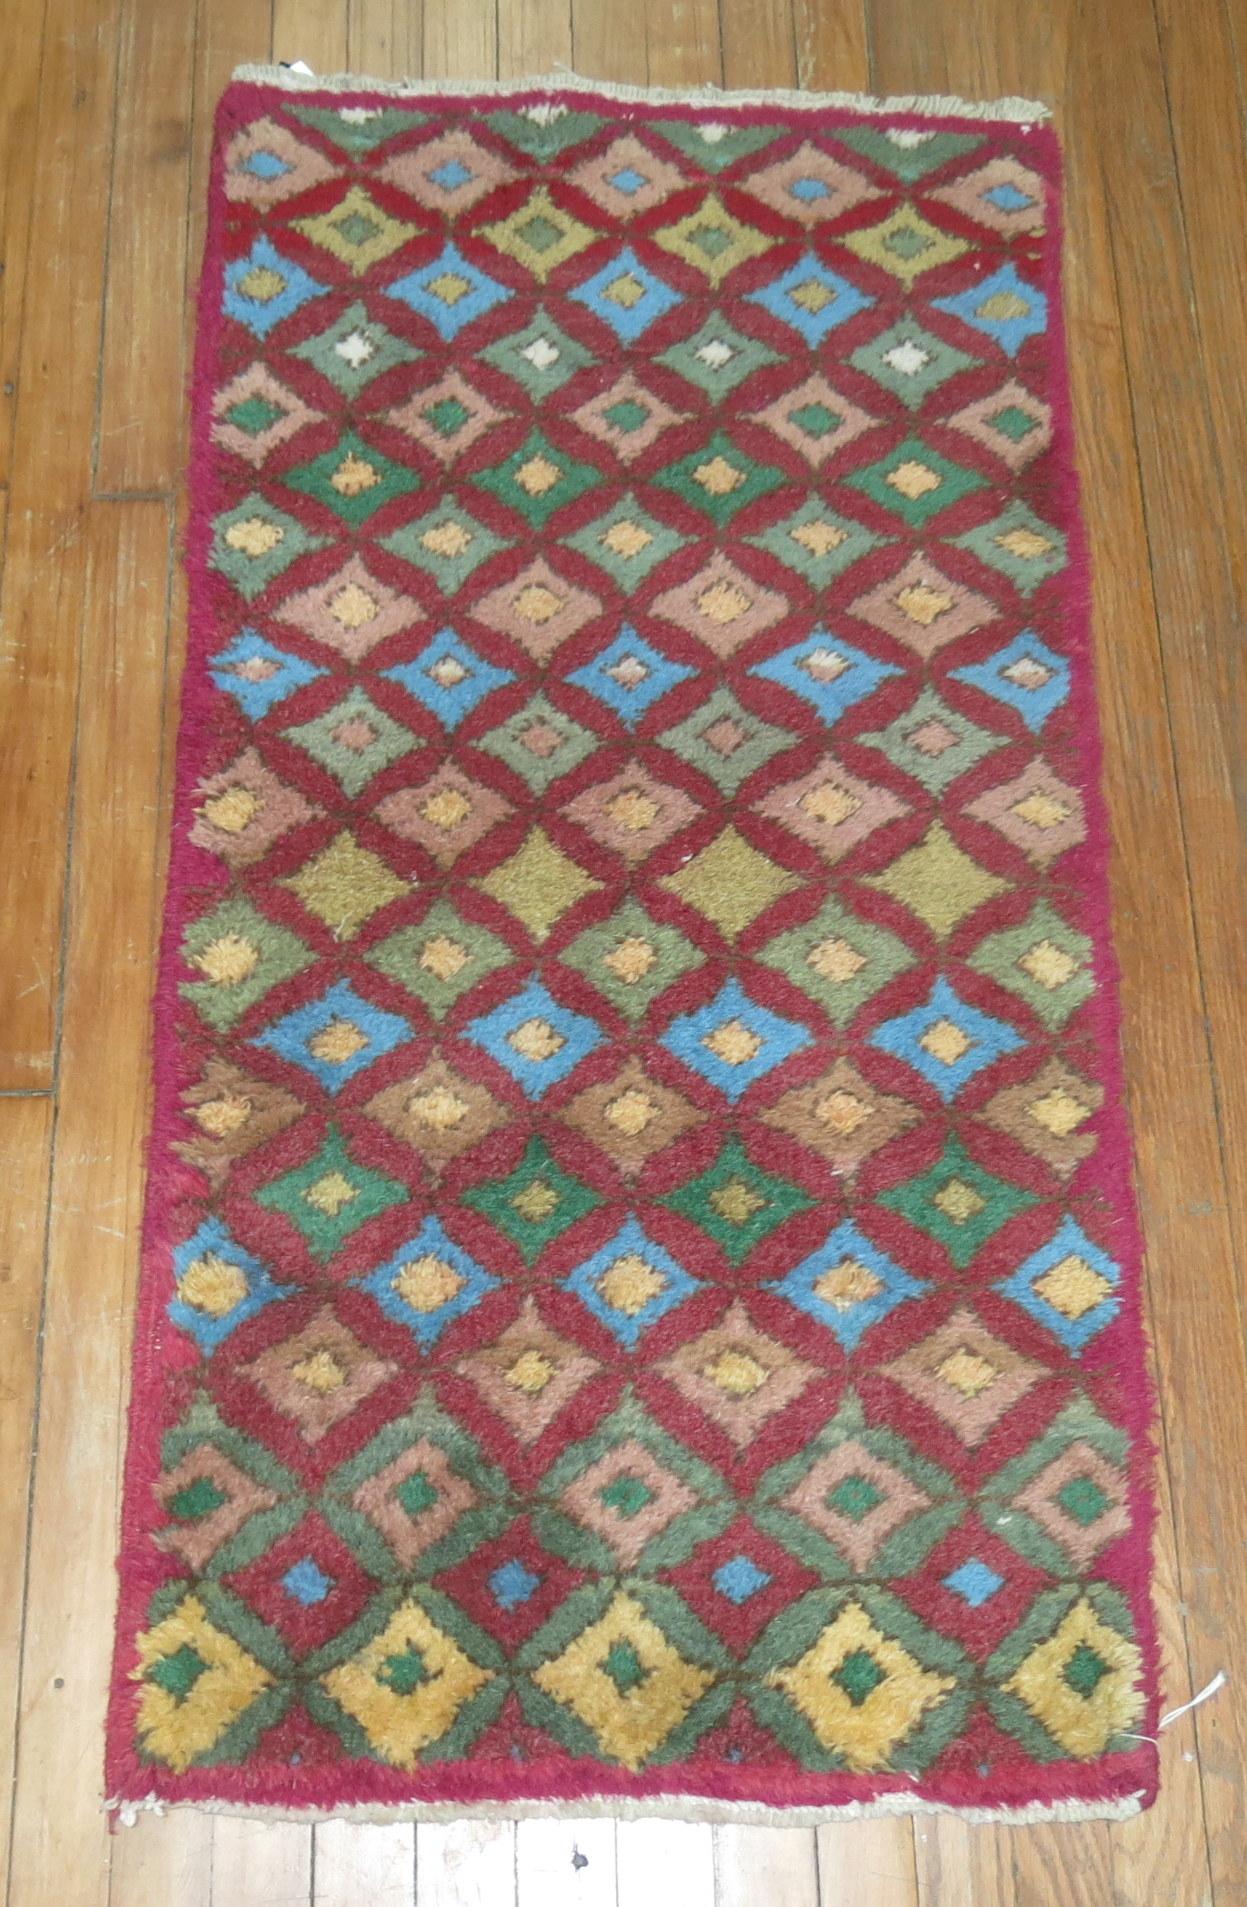 Small size Raspberry field color Turkish deco rug.

2'1'' x 4'